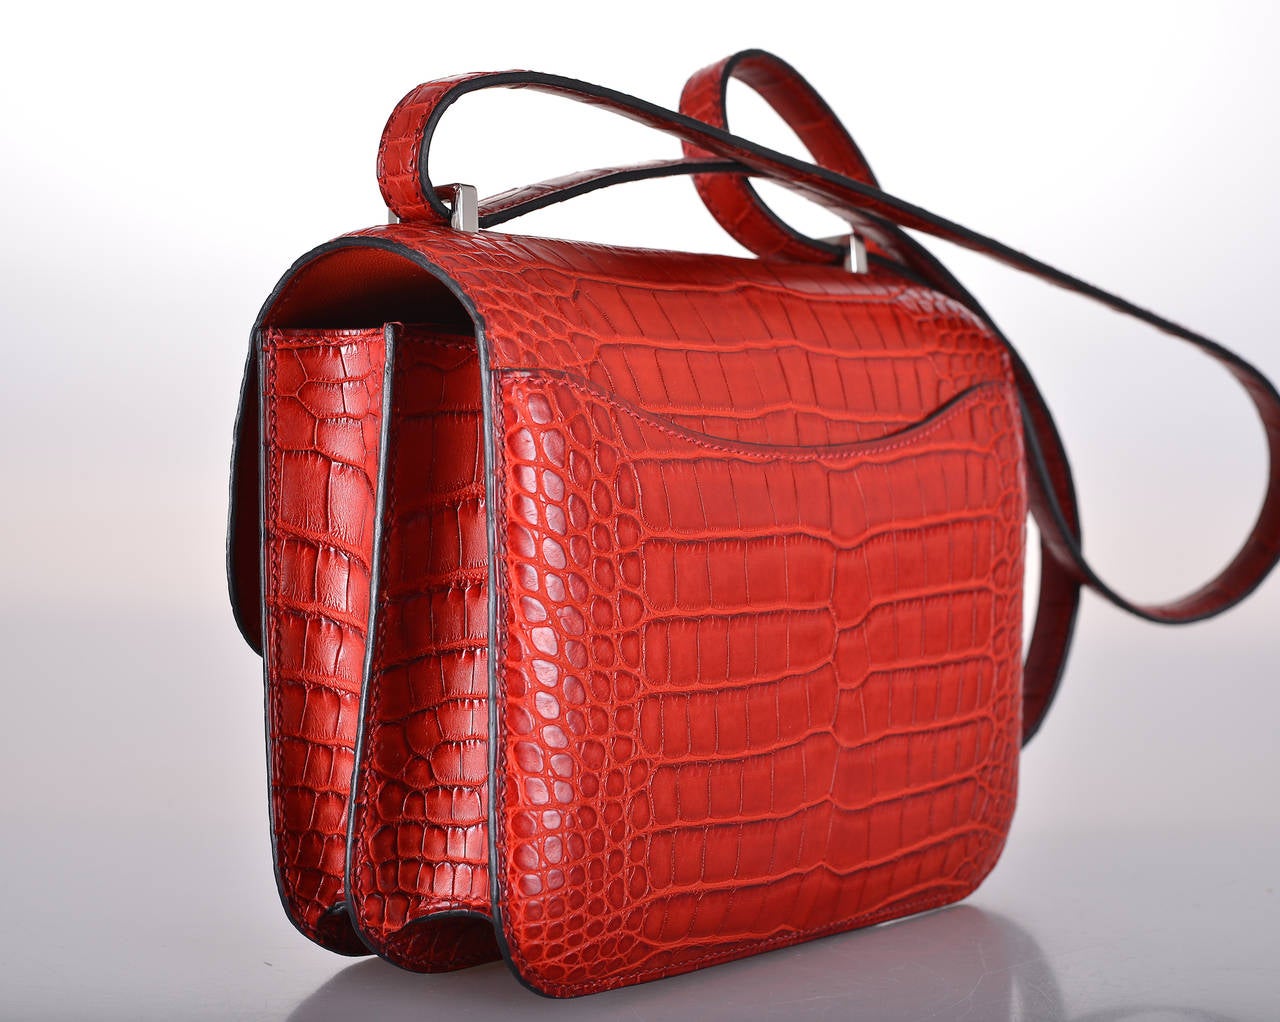 As always, another one of my fab finds! Hermes Constance in ALLIGATOR, a PERFECT size 18cm! Very rare FIND in the ROUGE H WITH PALLADIUM HARDWARE AND EXTRA BACK POCKET. Comfy double strap that is perfect to carry cross body! 

Measurements: 7.5